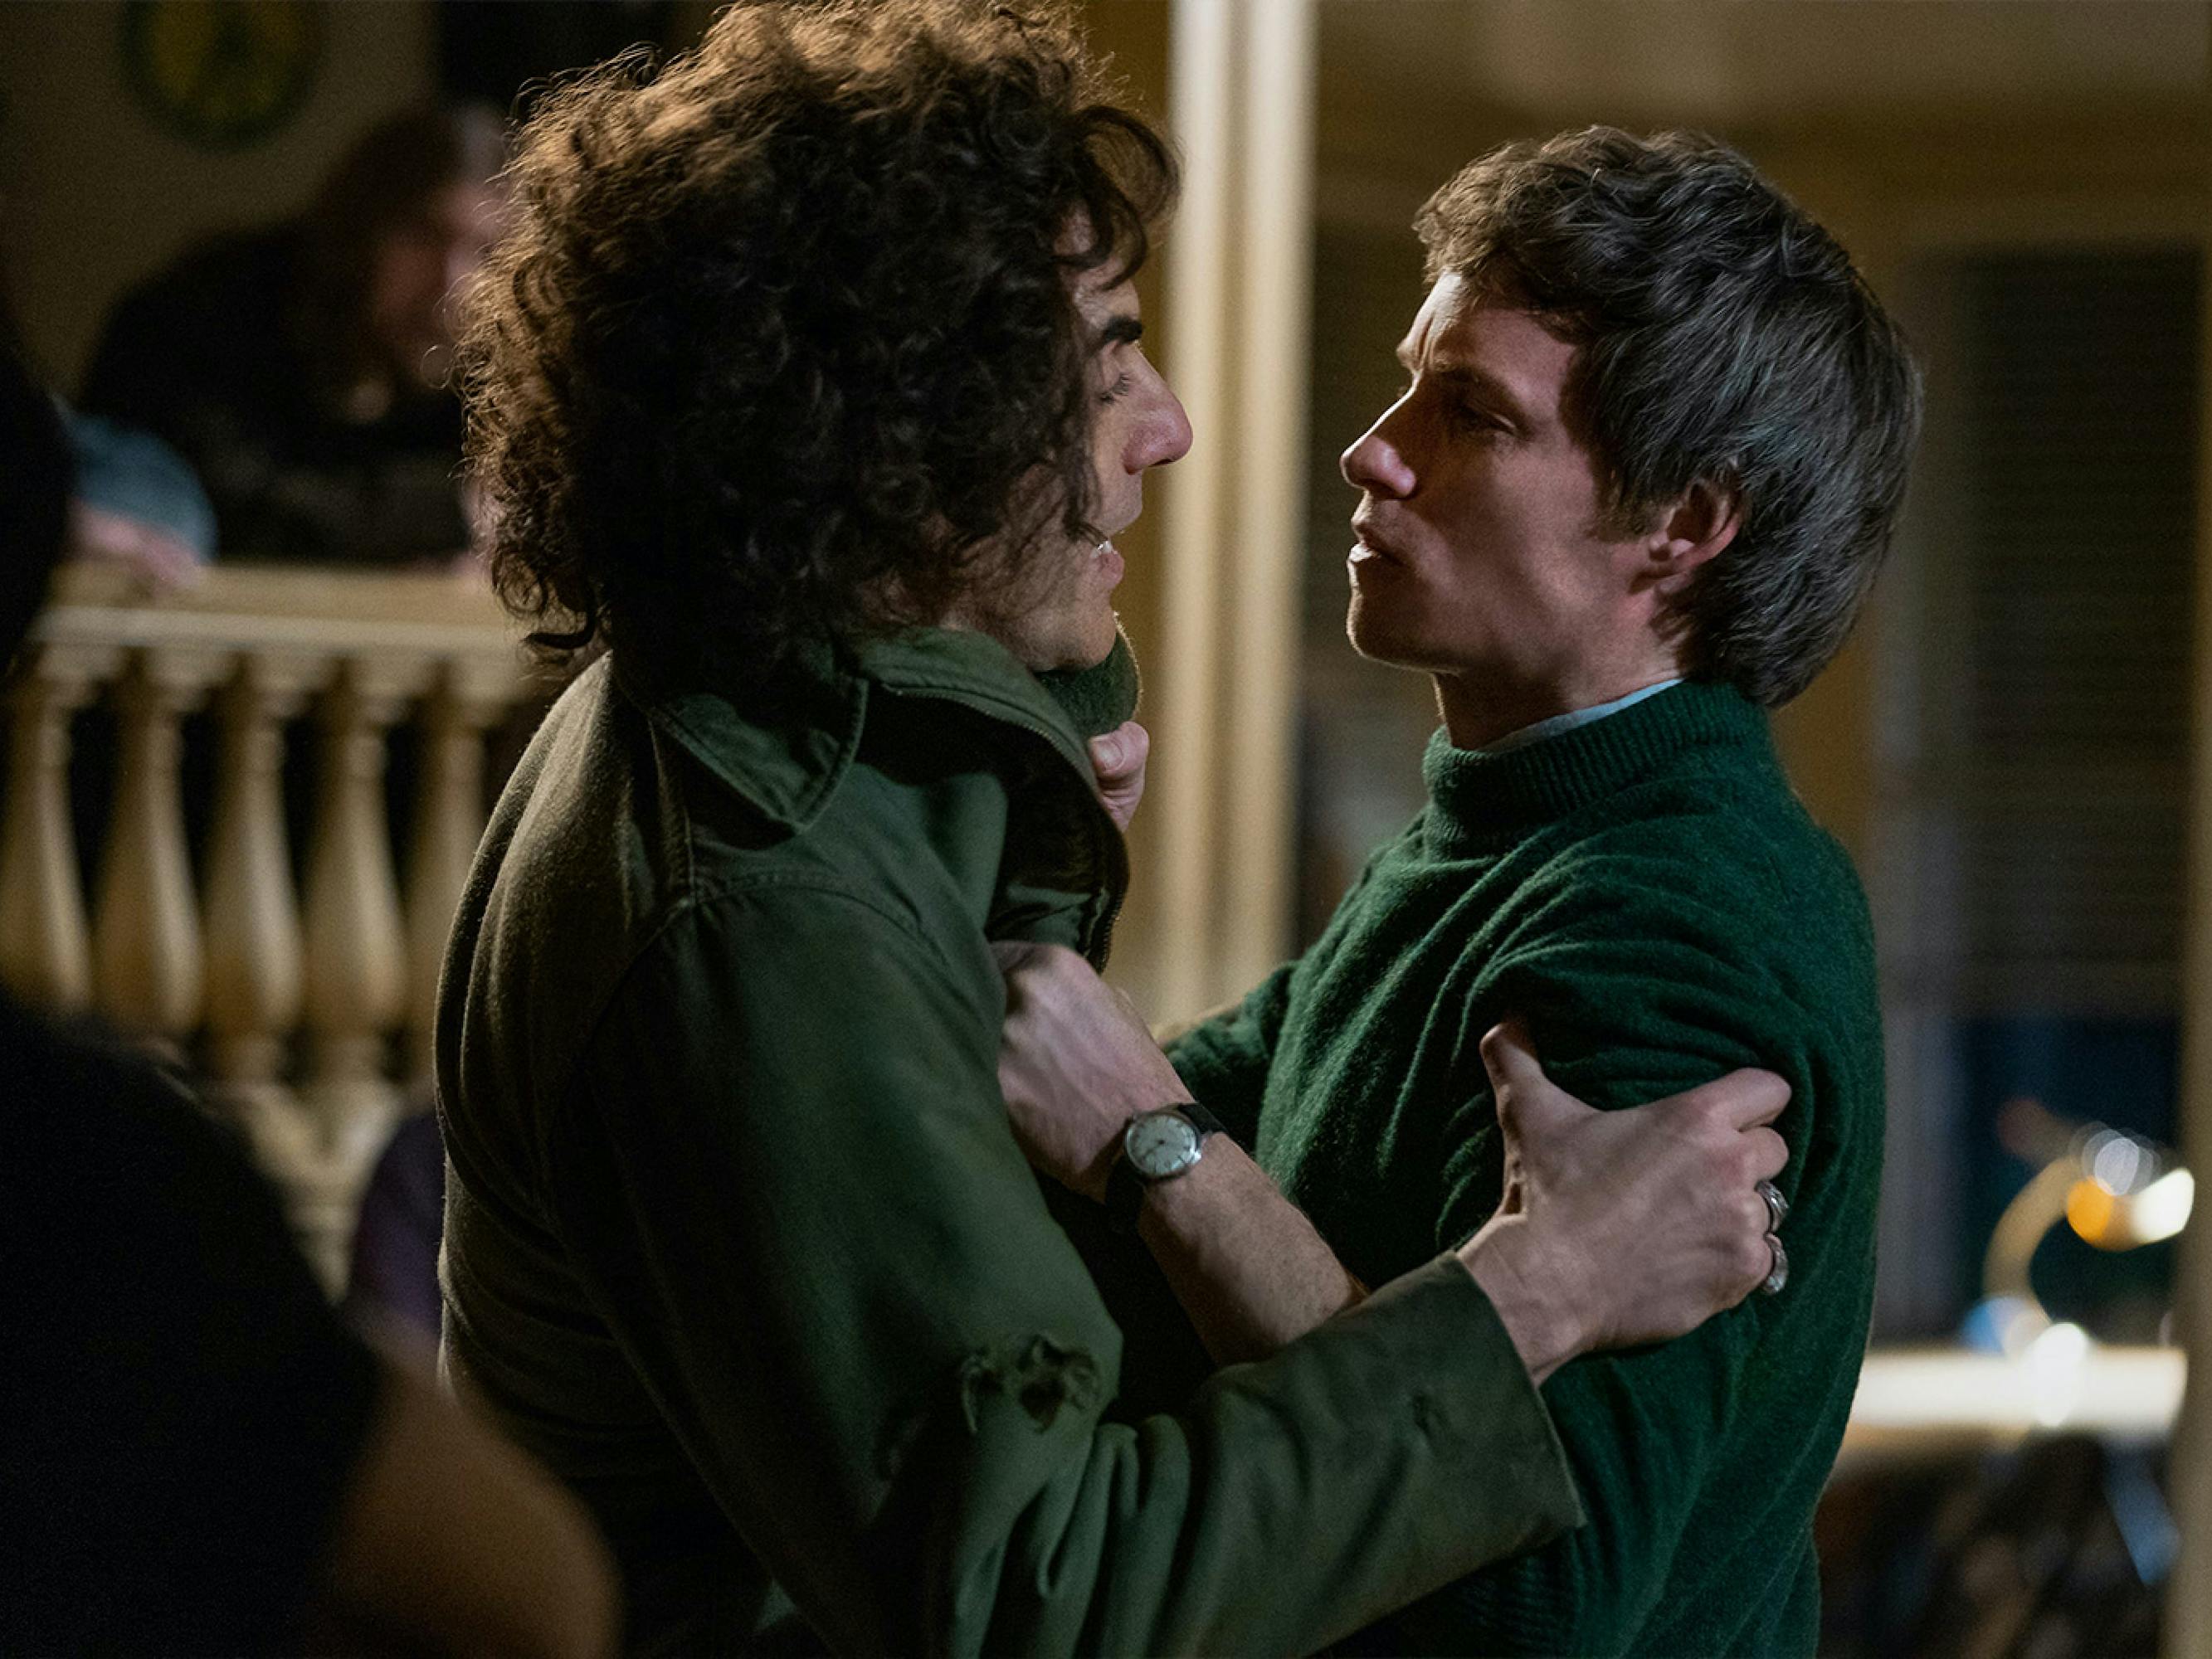 Cohen and Redmayne grip each other in a tense showdown. They both wear green, and look angry, while Cohen appears to be speaking. 